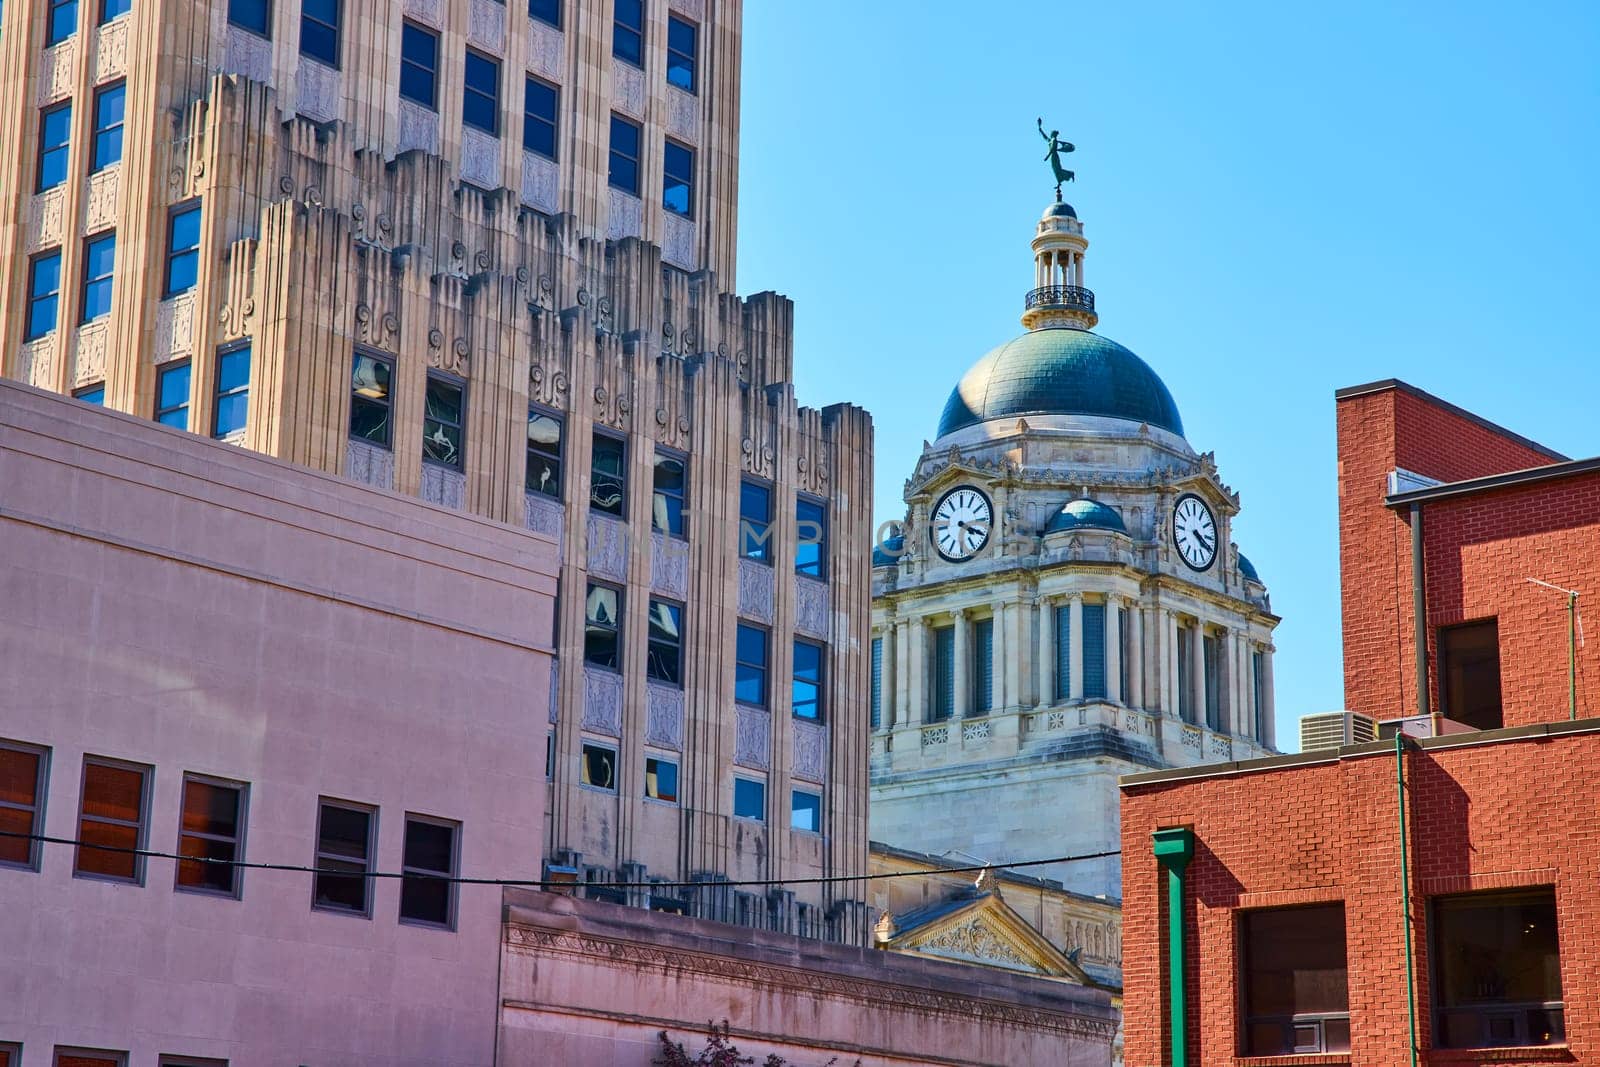 Historic and modern architecture blend under the clear skies of downtown Fort Wayne, Indiana.